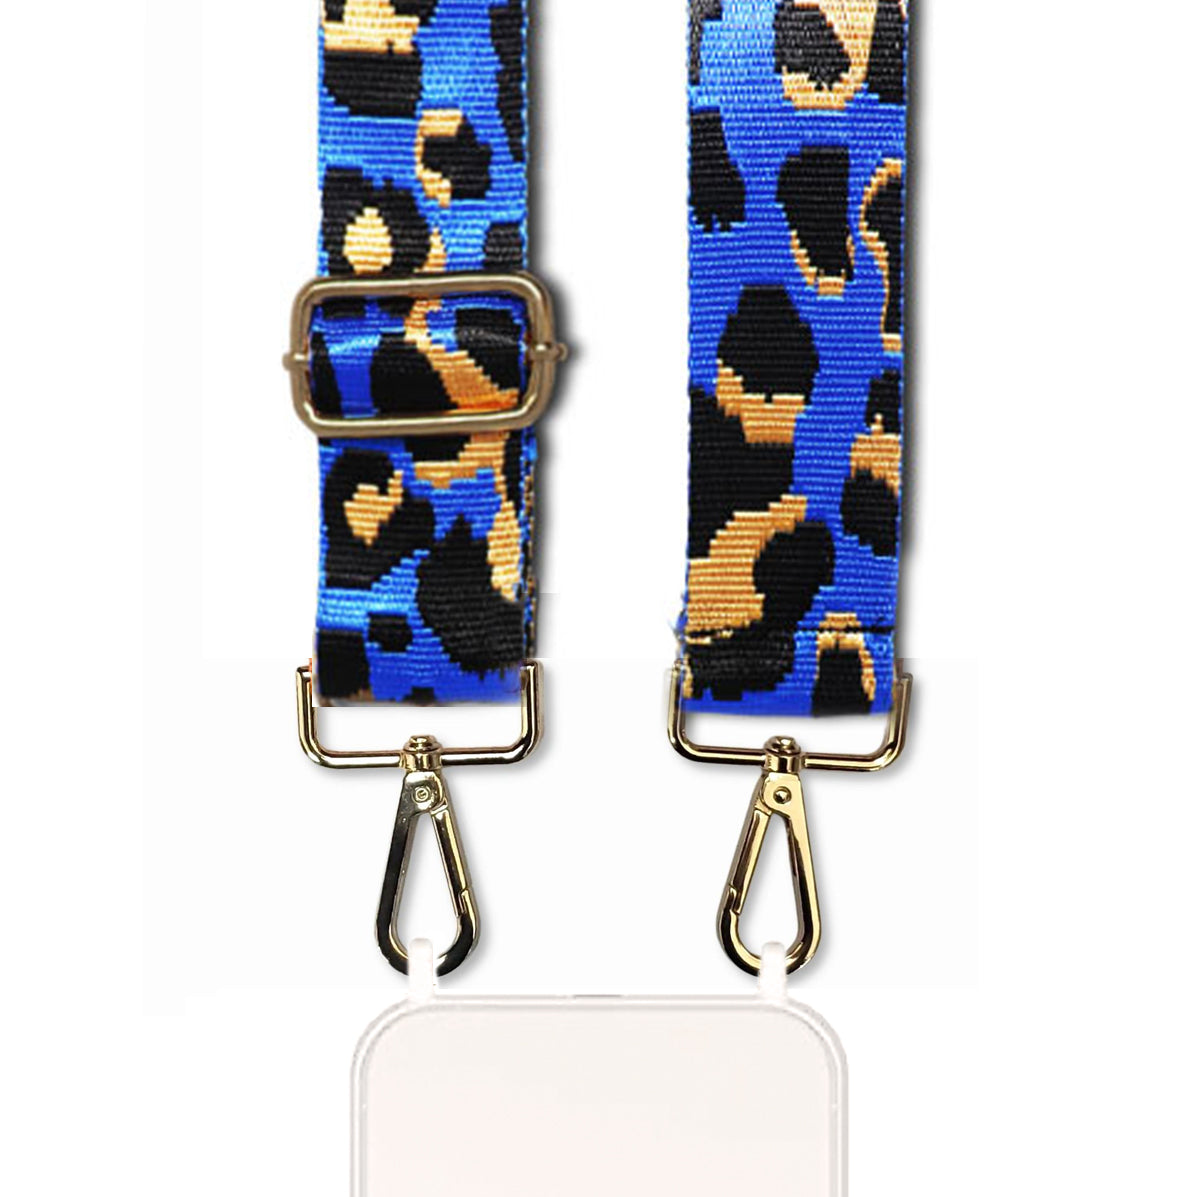 Zahara - Leopard Print Adjustable Strap with Golden Carabiners